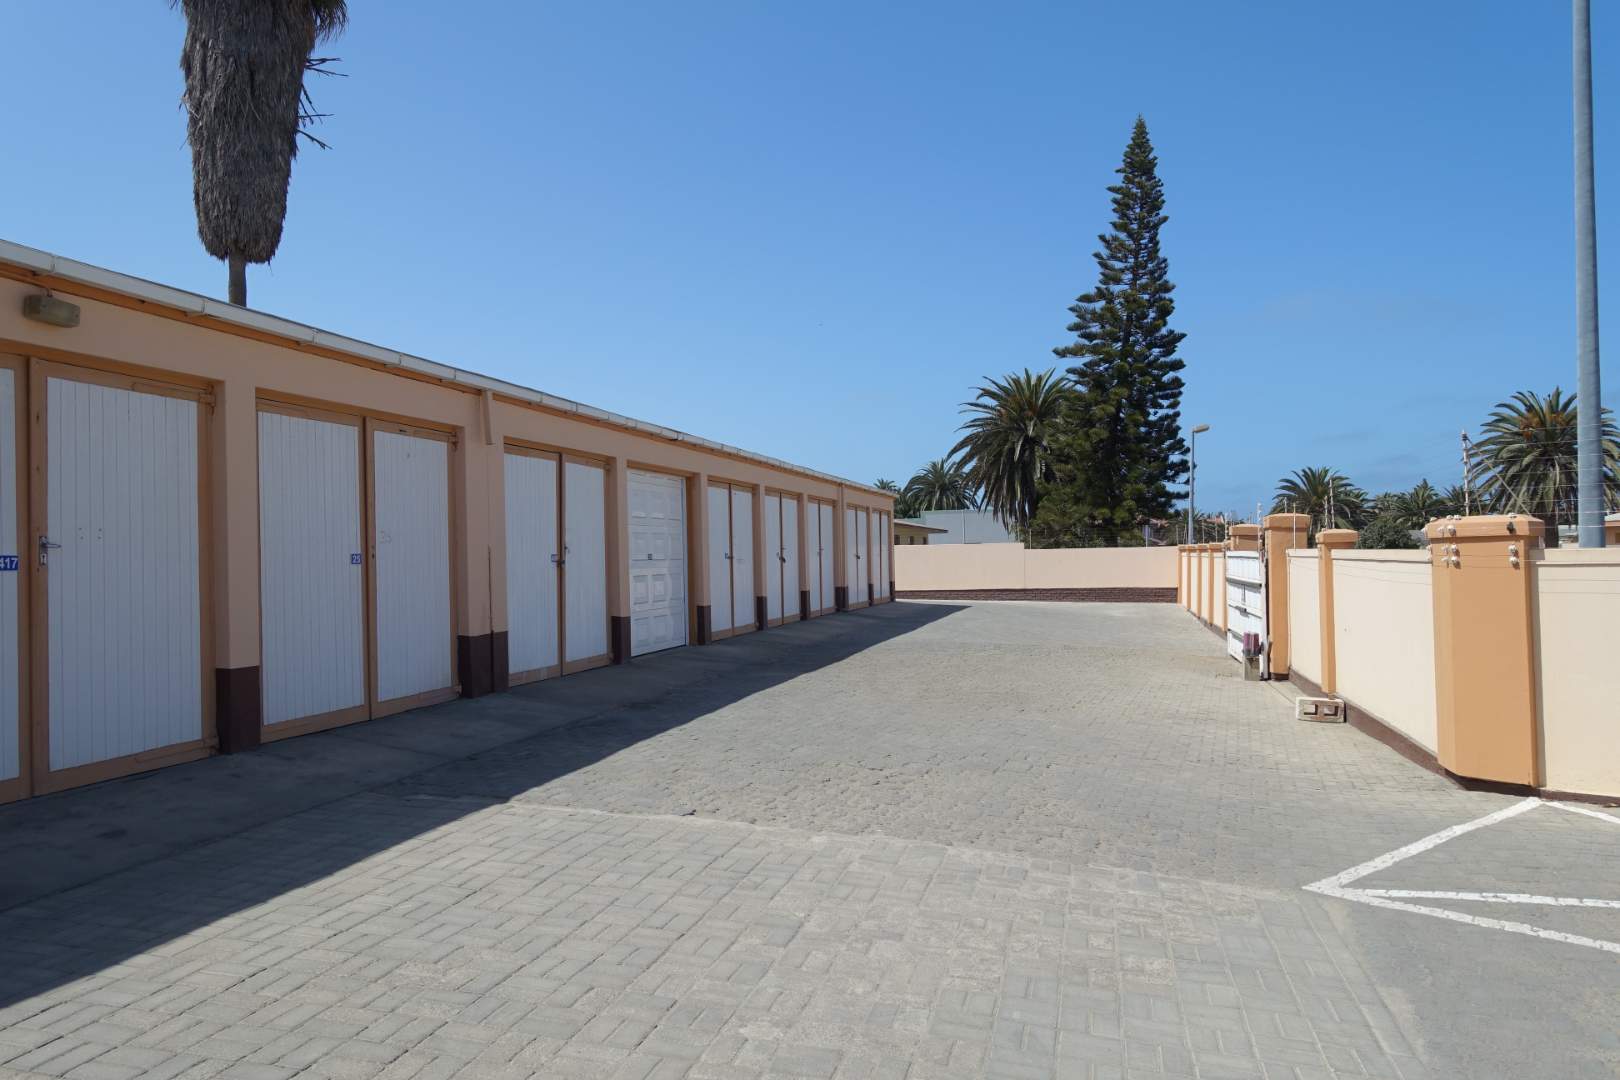 Single garages with access to Sphinx Street